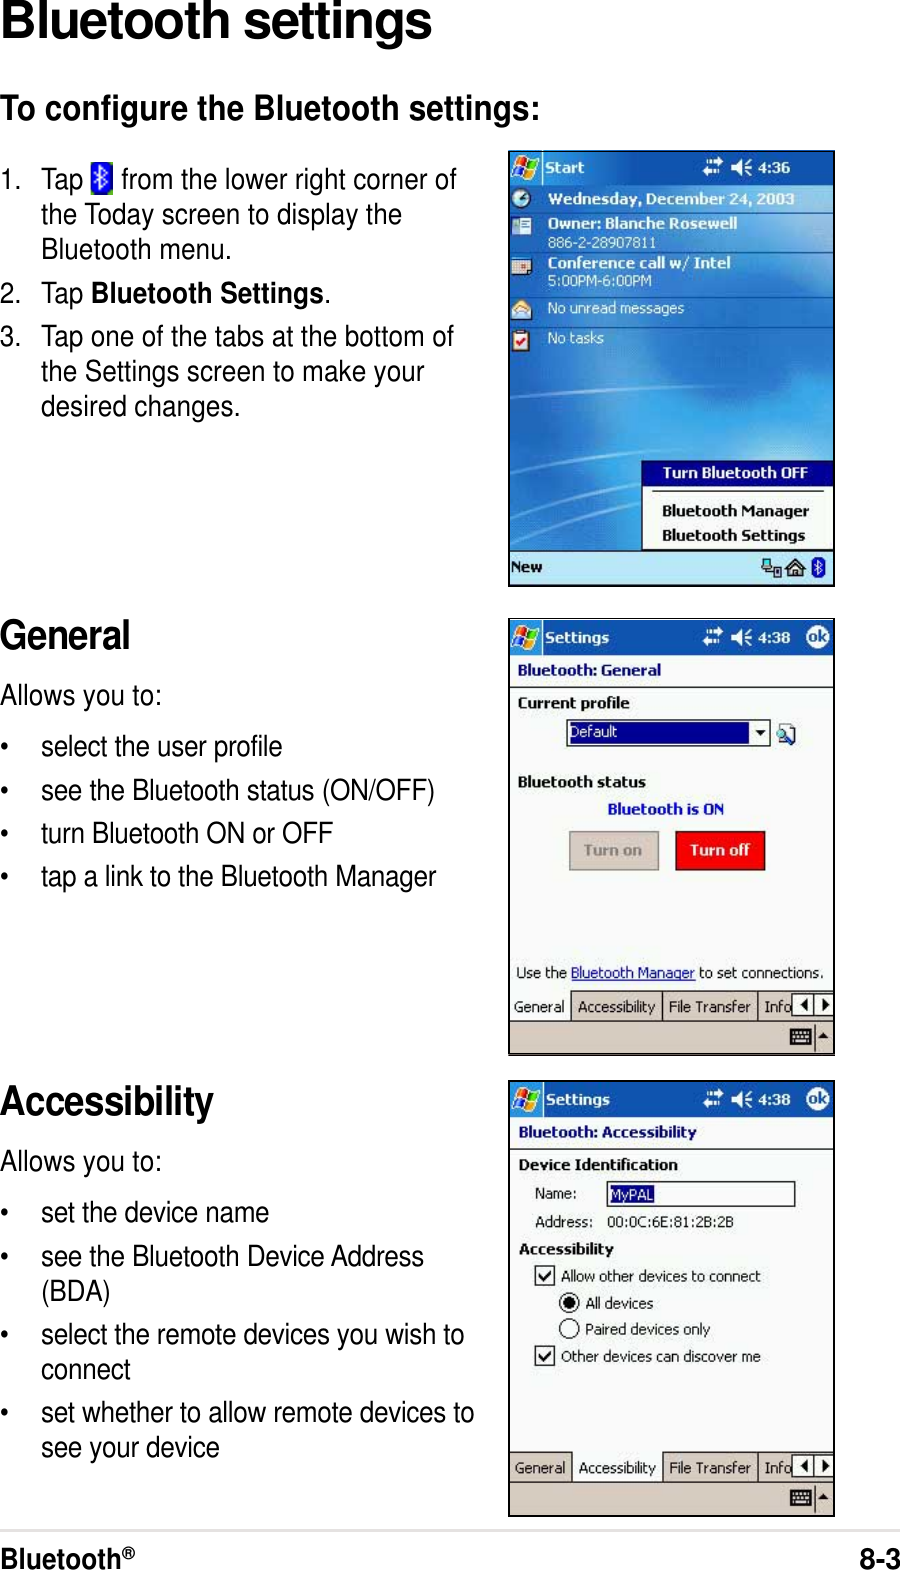 Bluetooth®8-3Bluetooth settingsTo configure the Bluetooth settings:1. Tap   from the lower right corner ofthe Today screen to display theBluetooth menu.2. Tap Bluetooth Settings.3. Tap one of the tabs at the bottom ofthe Settings screen to make yourdesired changes.GeneralAllows you to:•select the user profile•see the Bluetooth status (ON/OFF)•turn Bluetooth ON or OFF•tap a link to the Bluetooth ManagerAccessibilityAllows you to:•set the device name•see the Bluetooth Device Address(BDA)•select the remote devices you wish toconnect•set whether to allow remote devices tosee your device